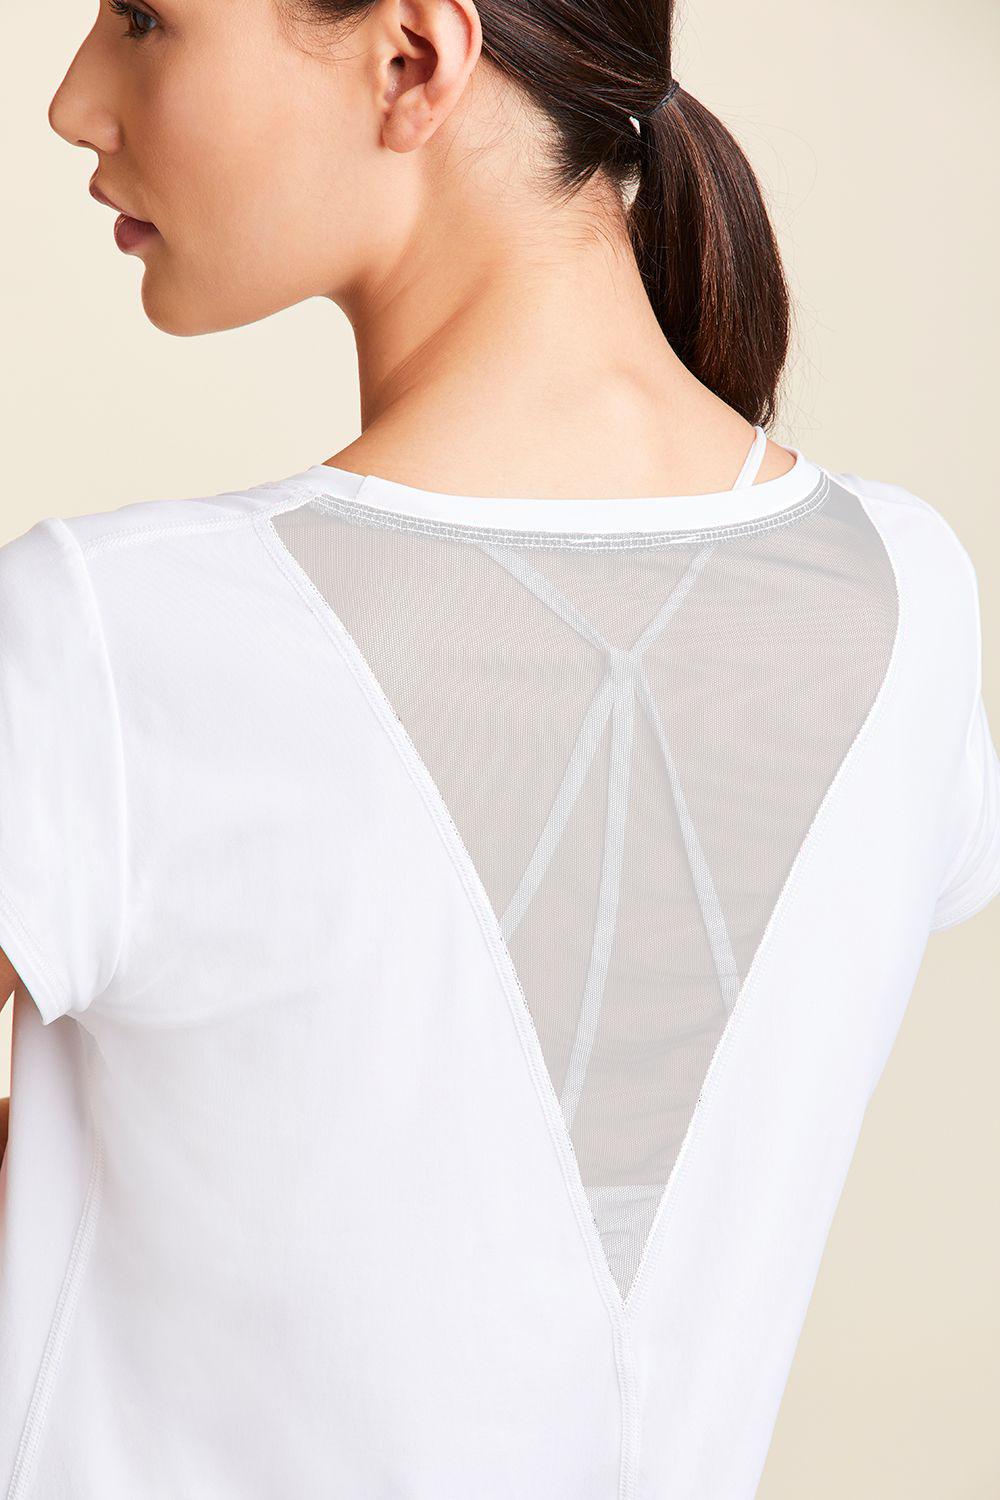 Alala women's tshirt with mesh in white